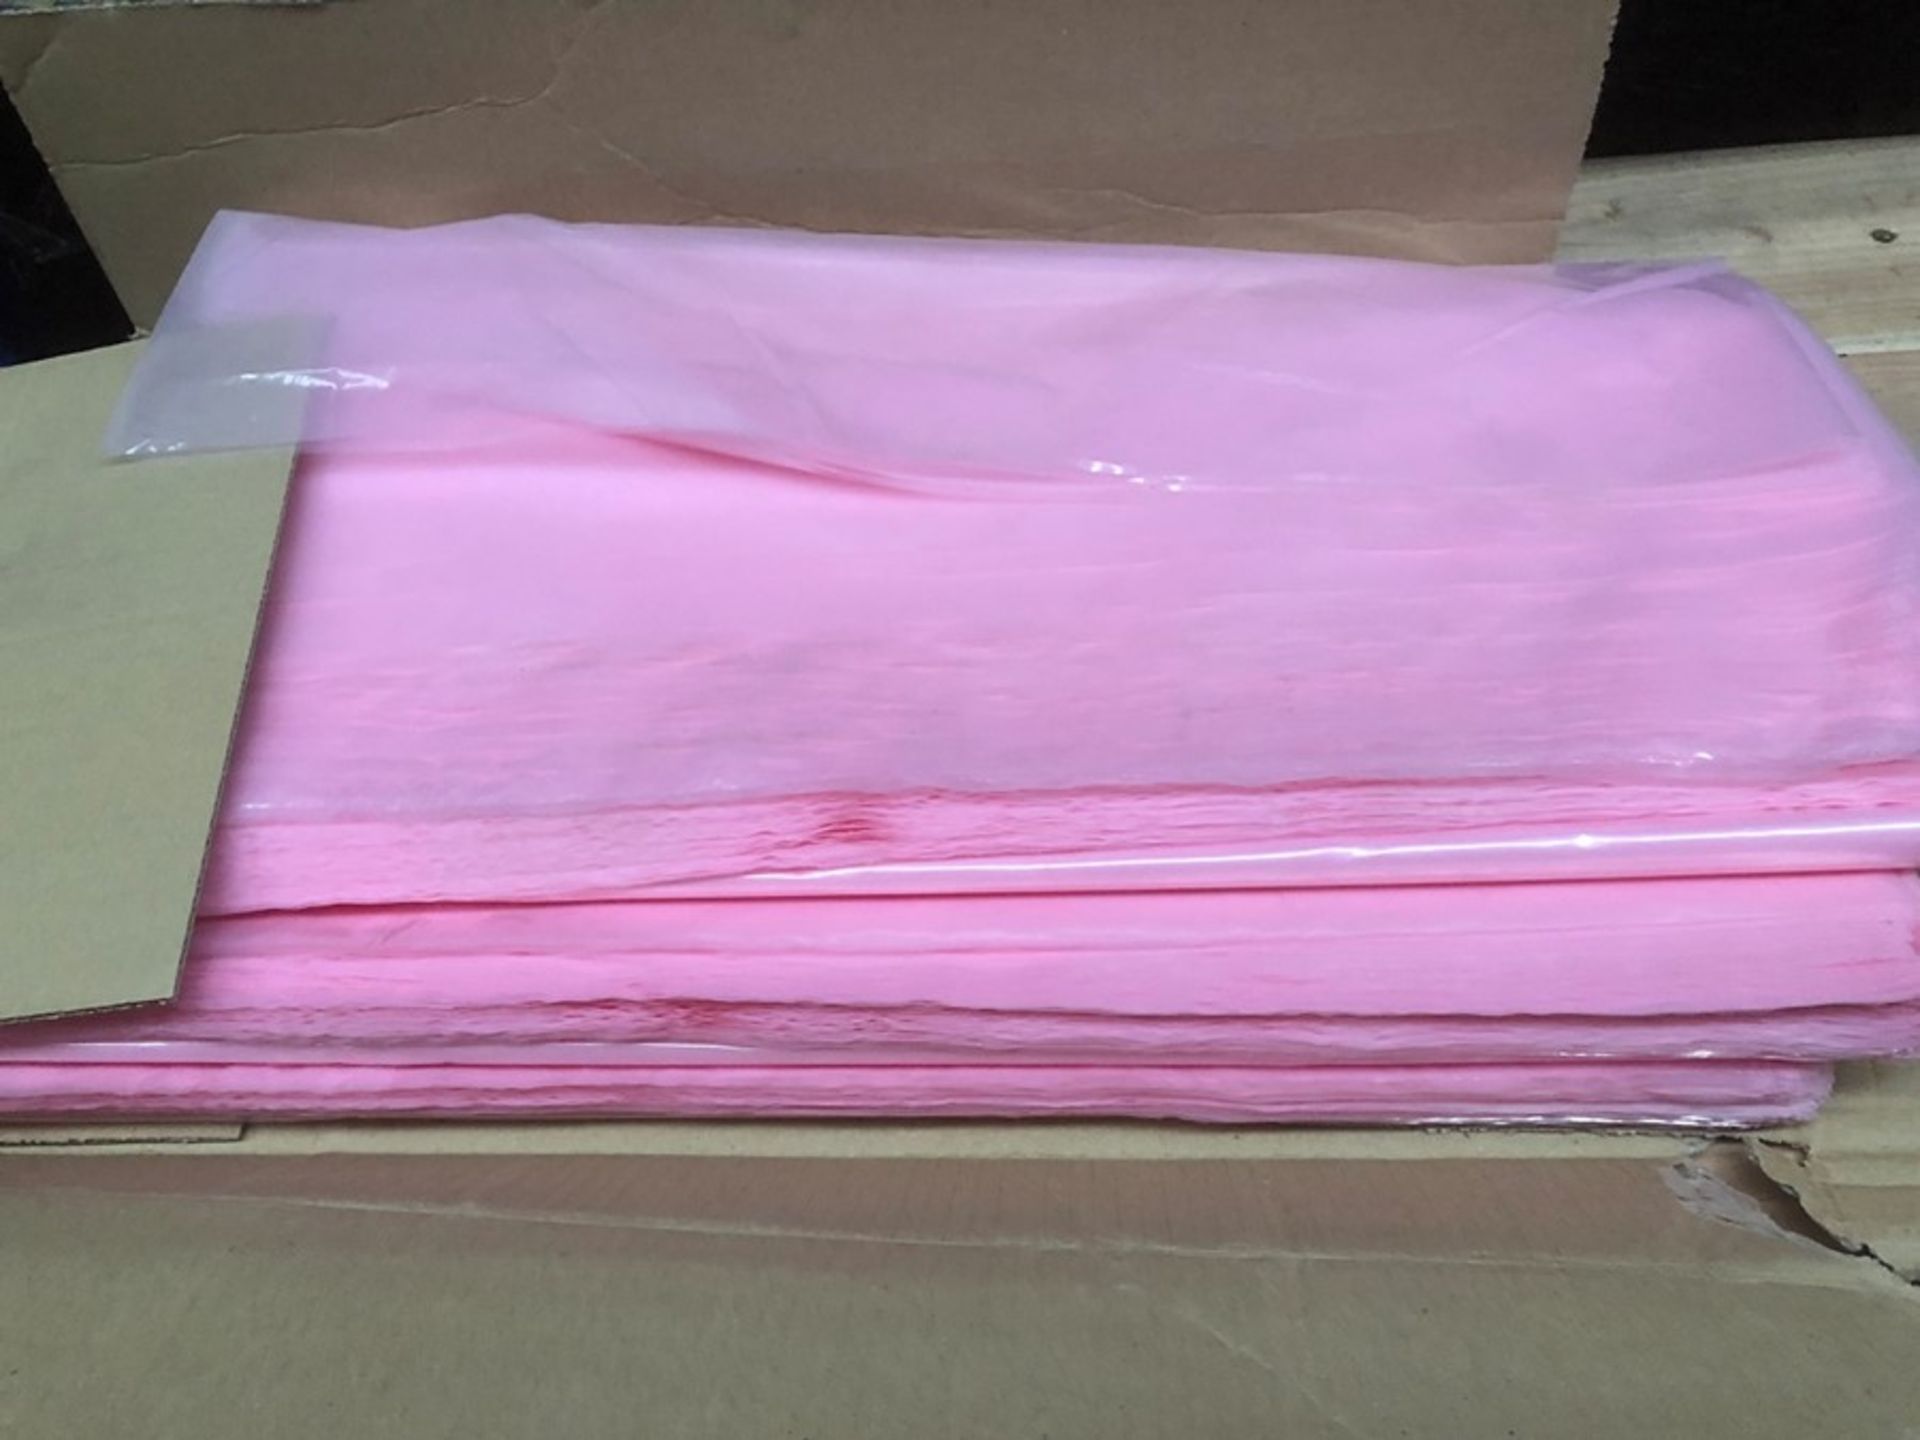 1 BOX TO CONTAIN APPROX 200 + PLASTIC BAGS IN PINK / PN - 880 (PUBLIC VIEWING AVAILABLE)